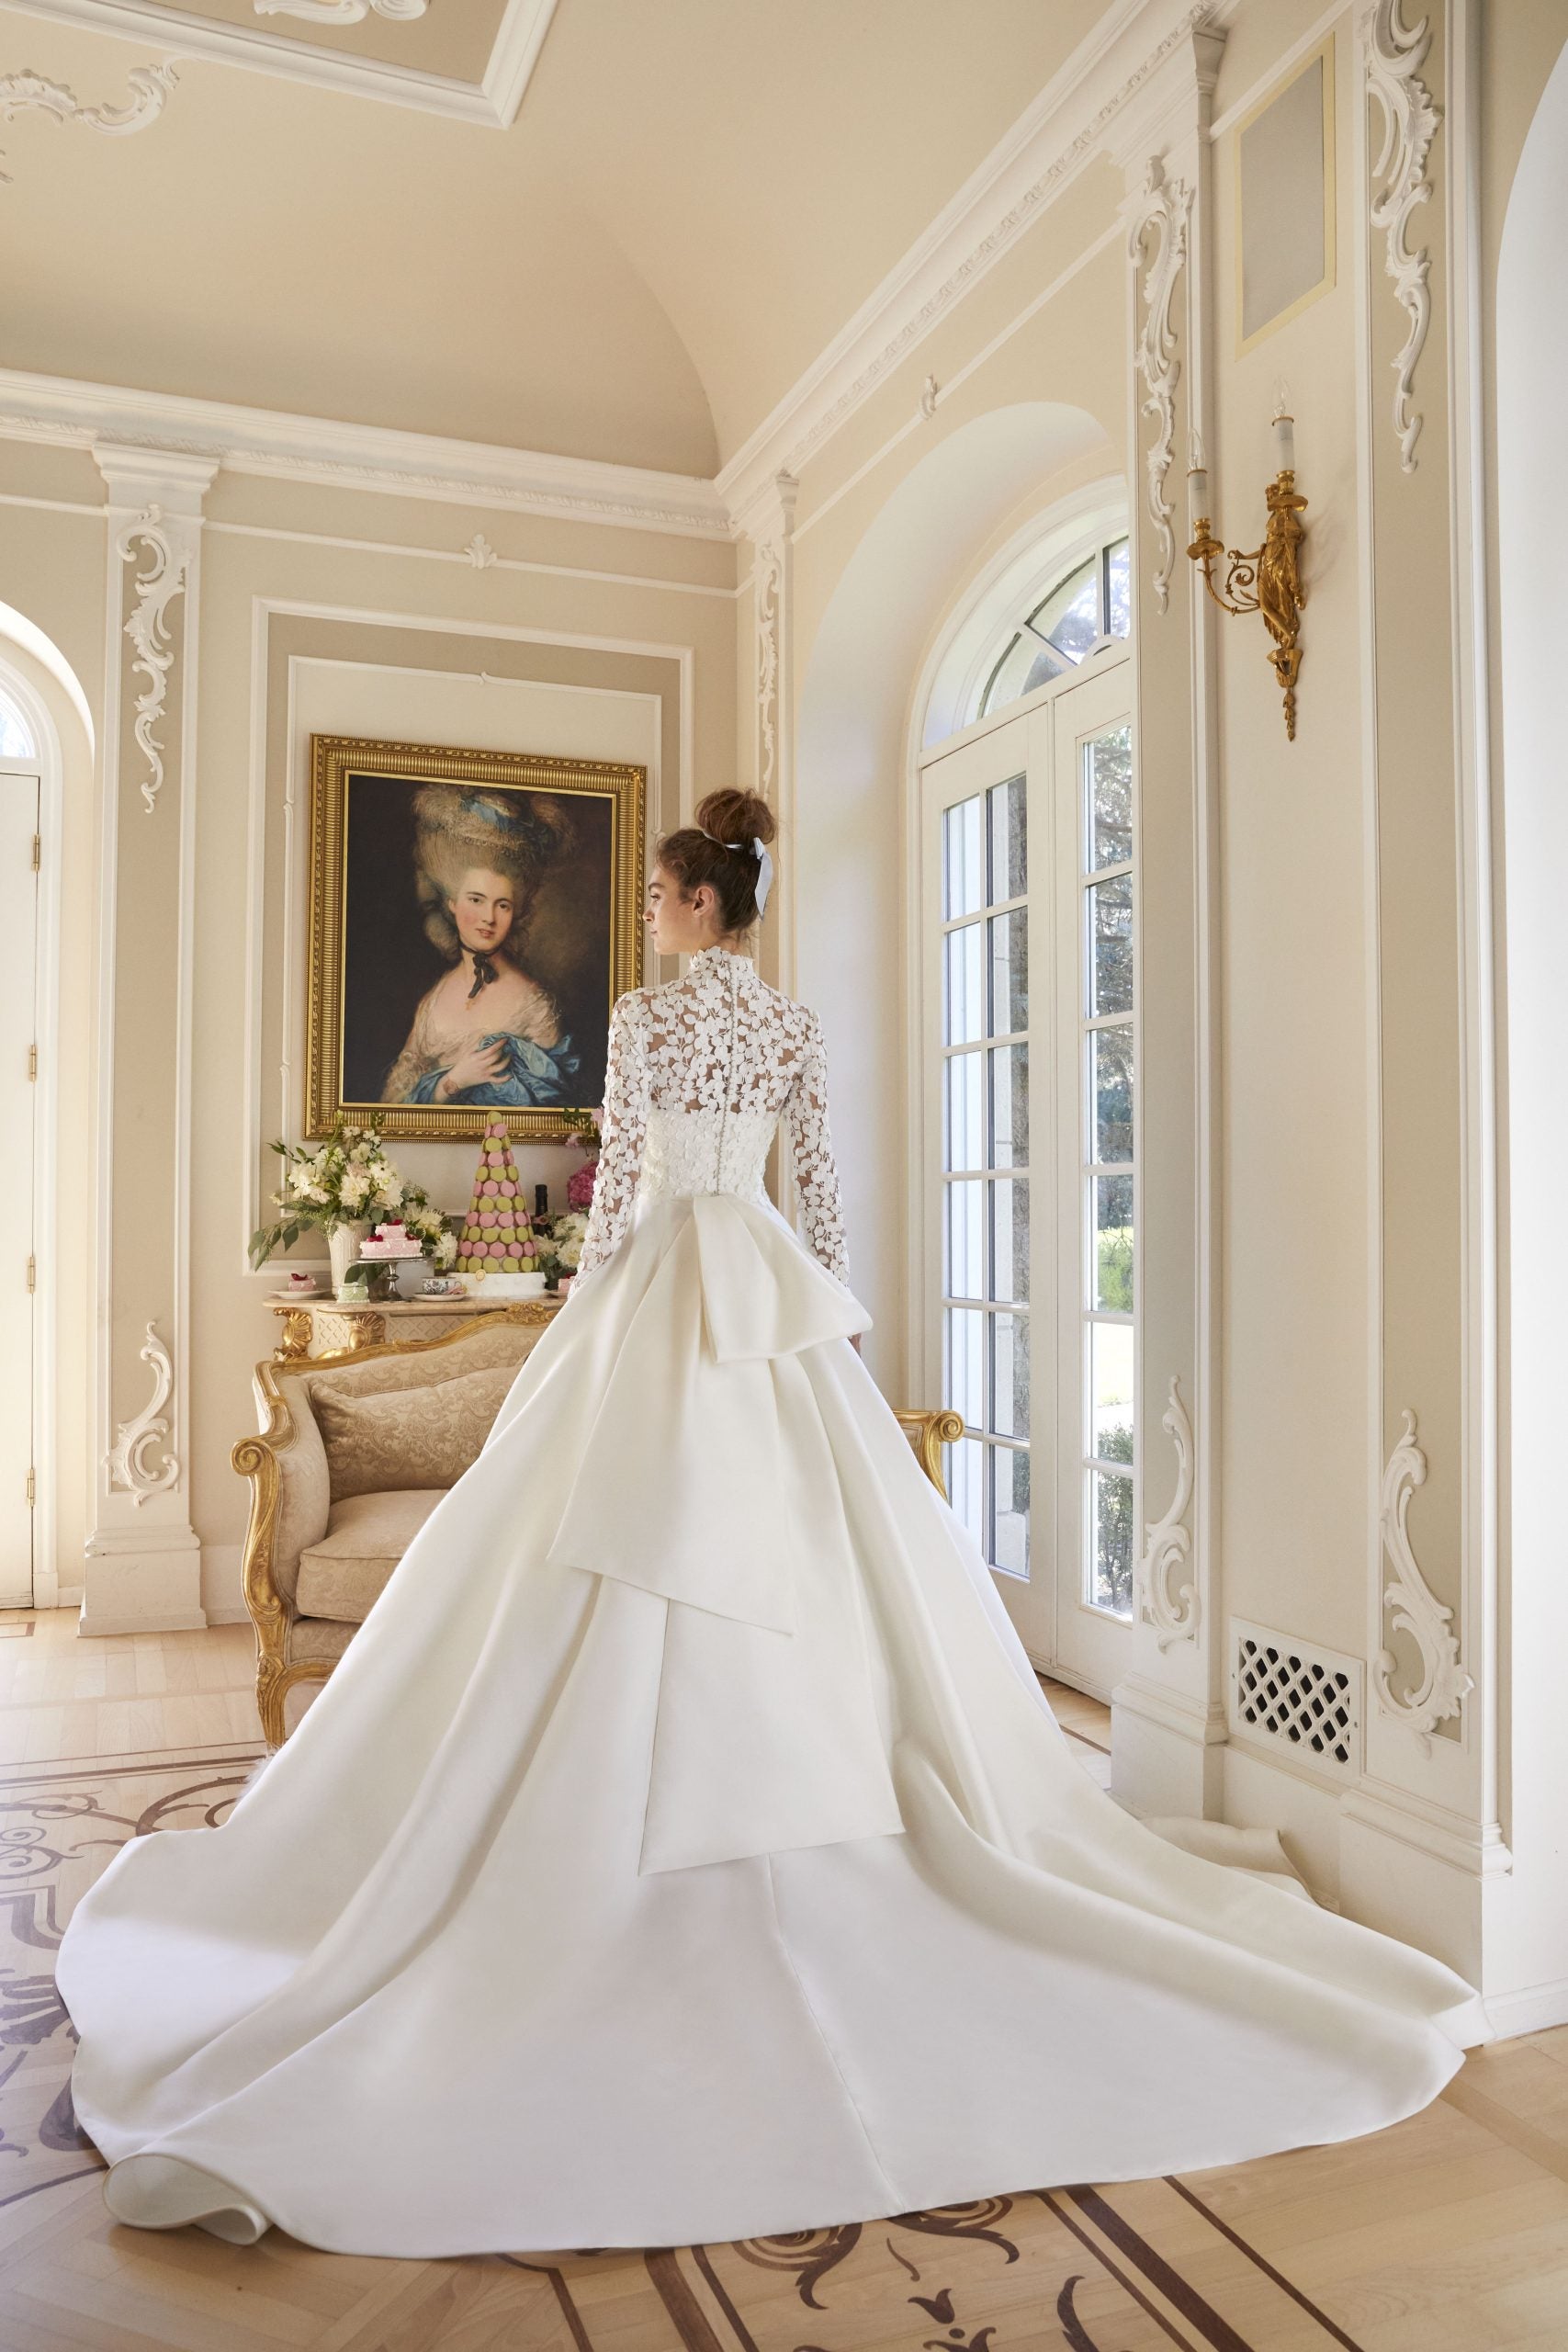 Chic Mikado Ball Gown With Detachable Bolero And Bow by Sareh Nouri - Image 2